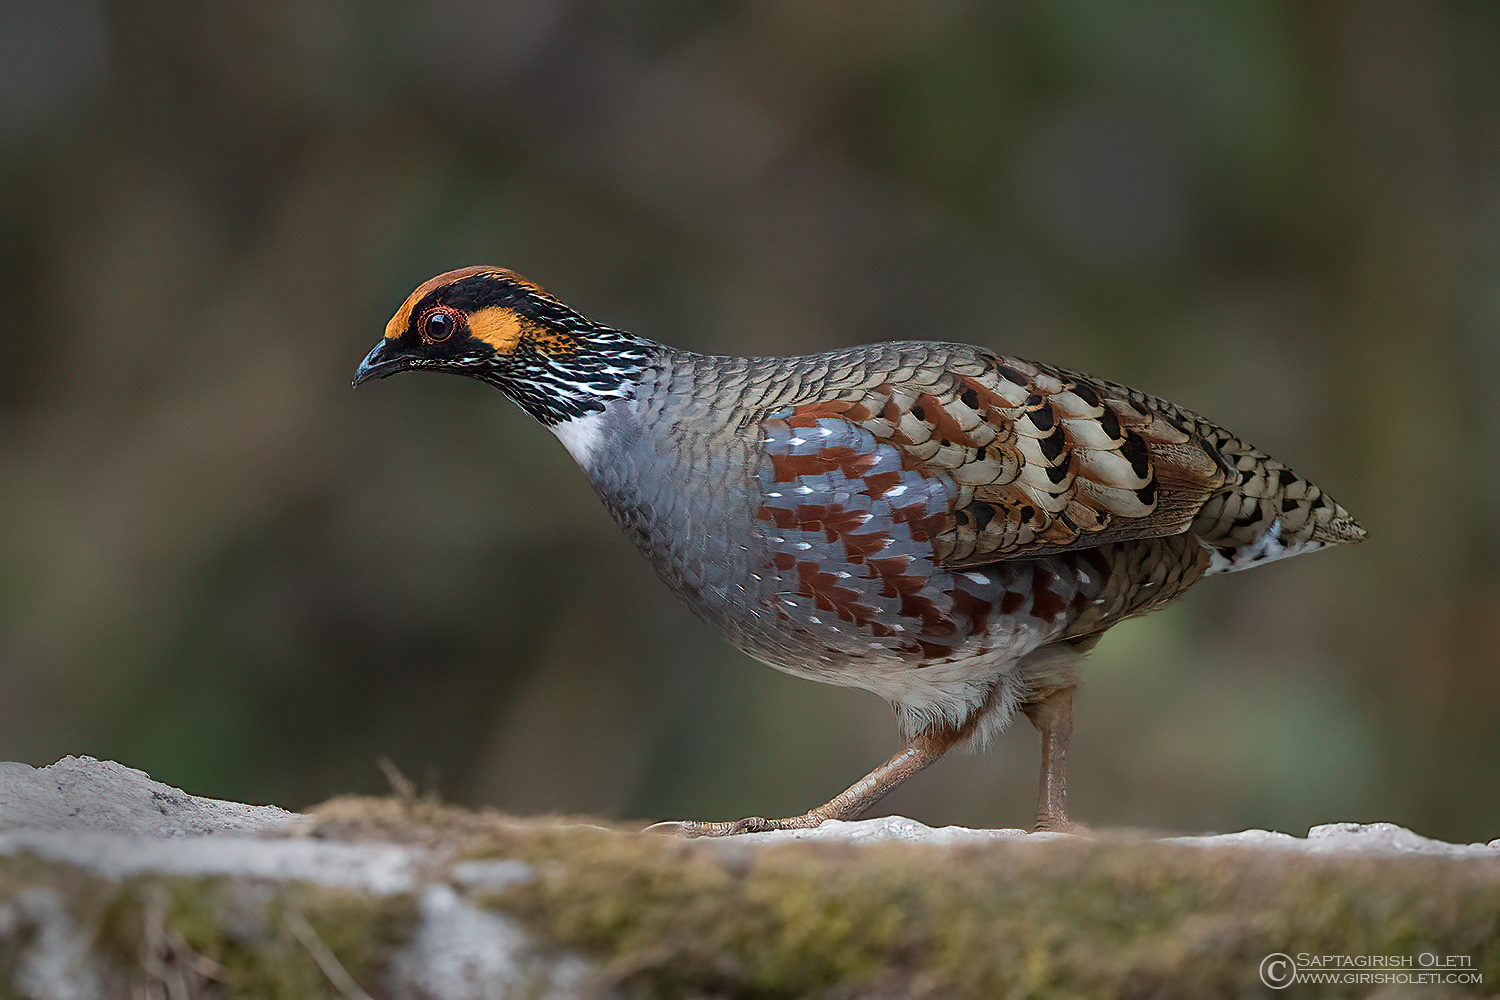 Common Hill-partridge photographed at Tiger hills, Darjeeling